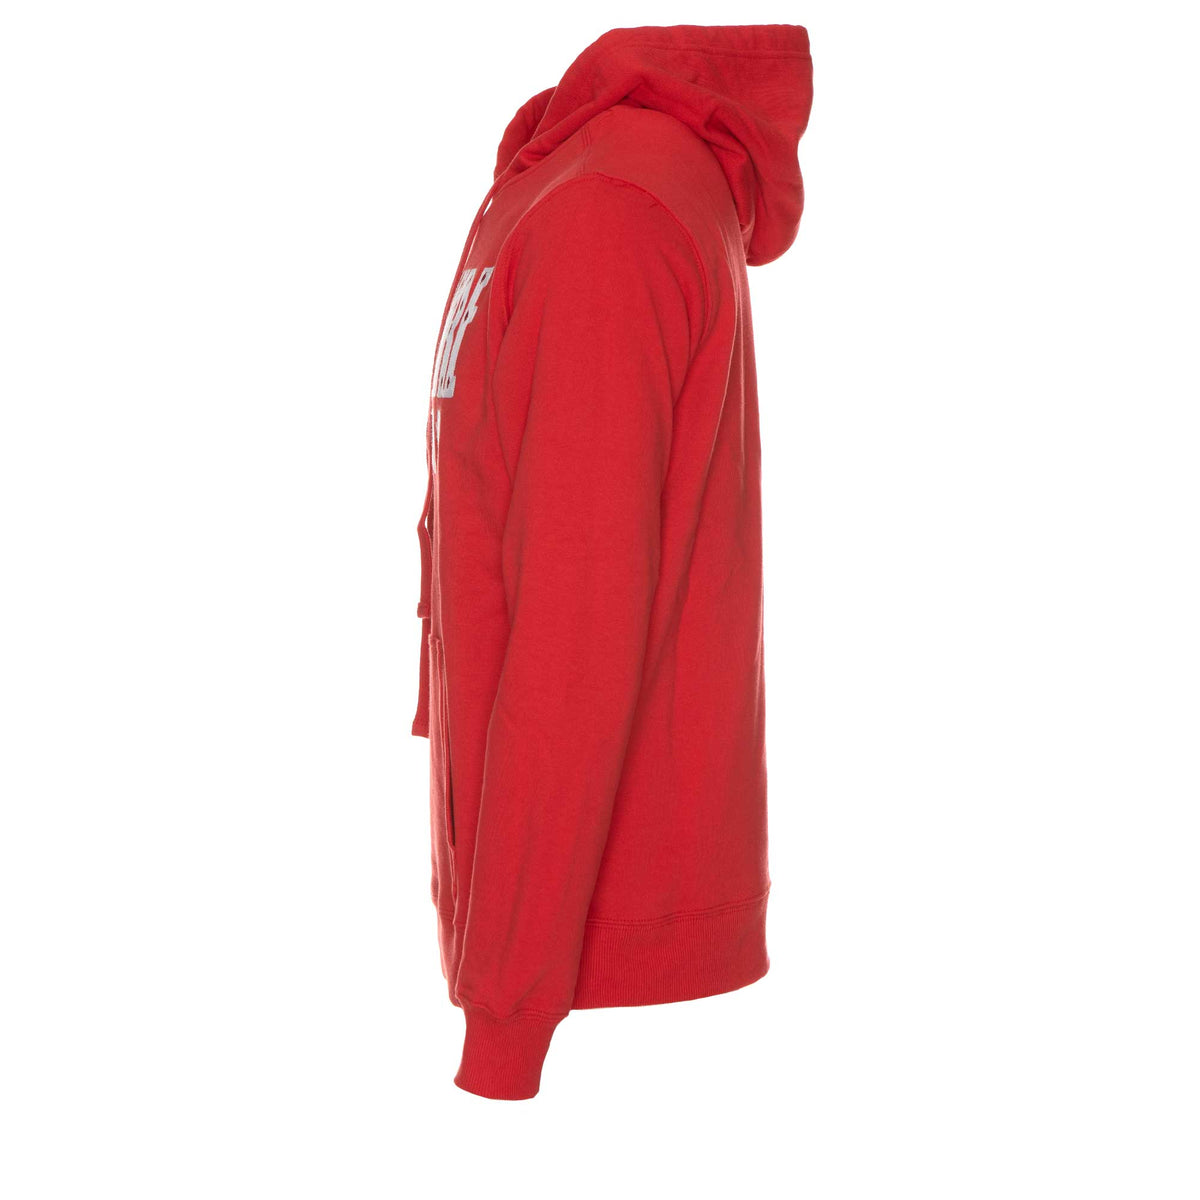 Billionaire Boys Club Parallel Hoodie Spring 19' Delivery II Red